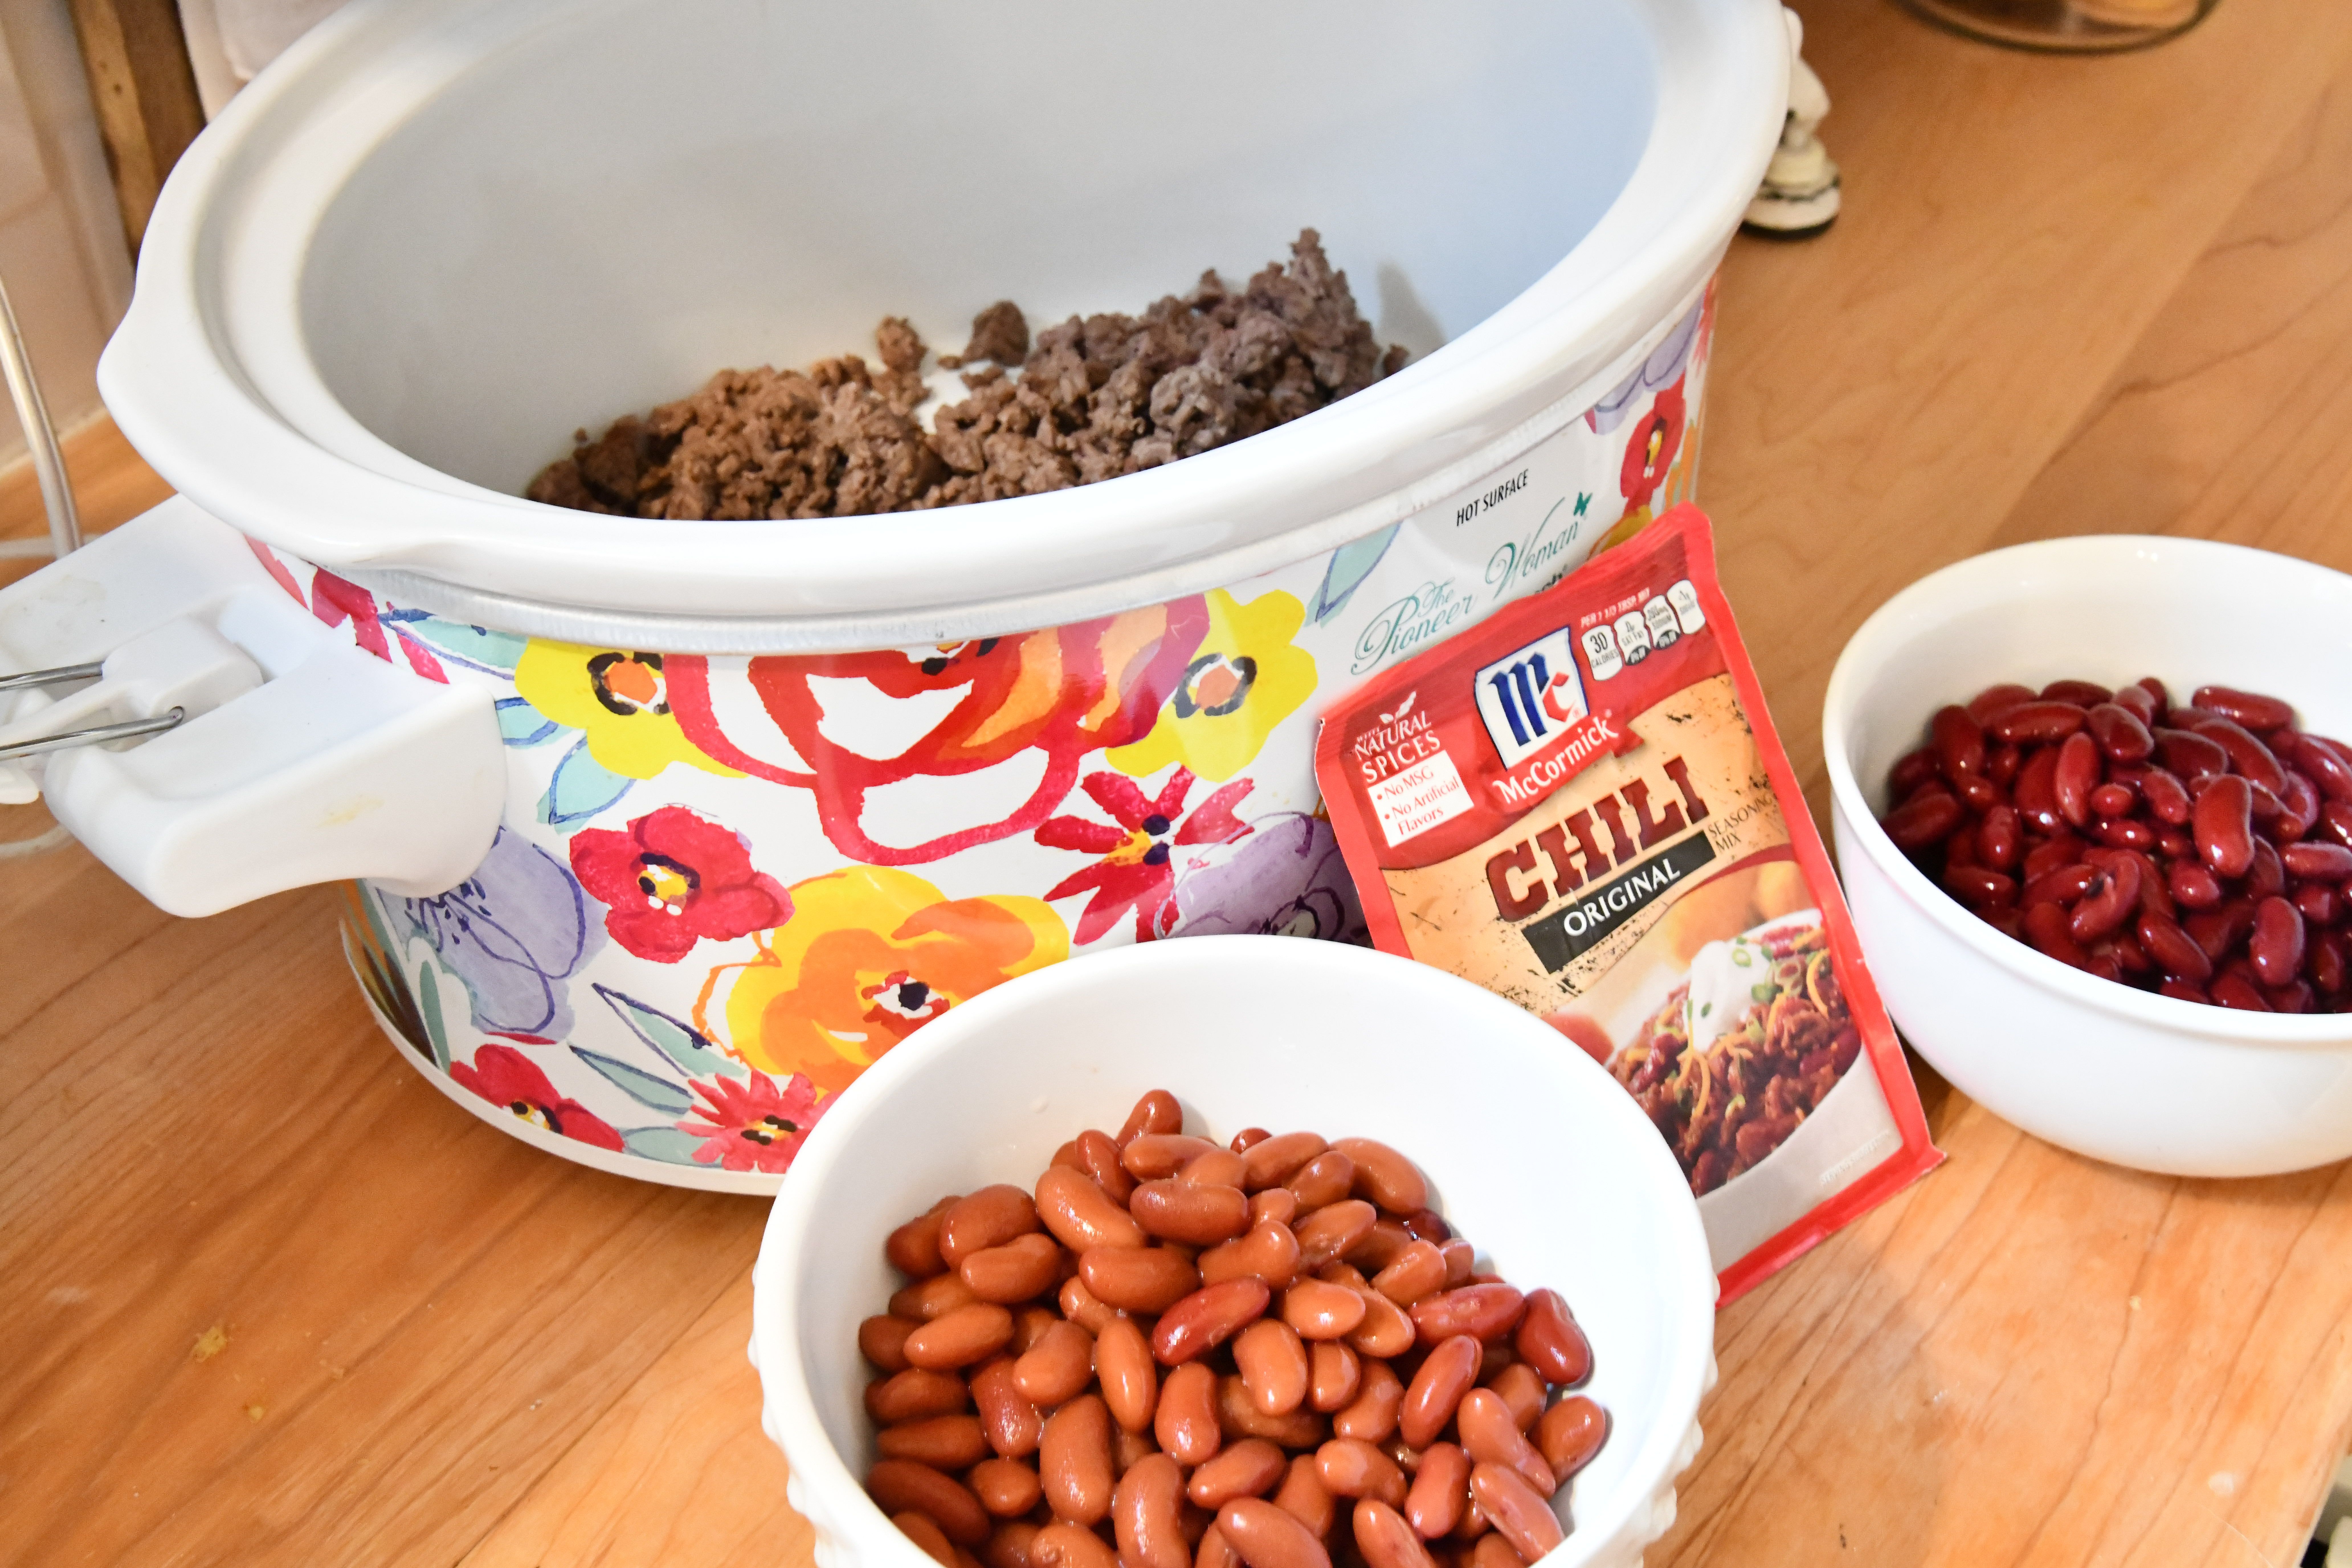 Crockpot with meat inside and bowls of kidney beans and hili mix on kitchen counter